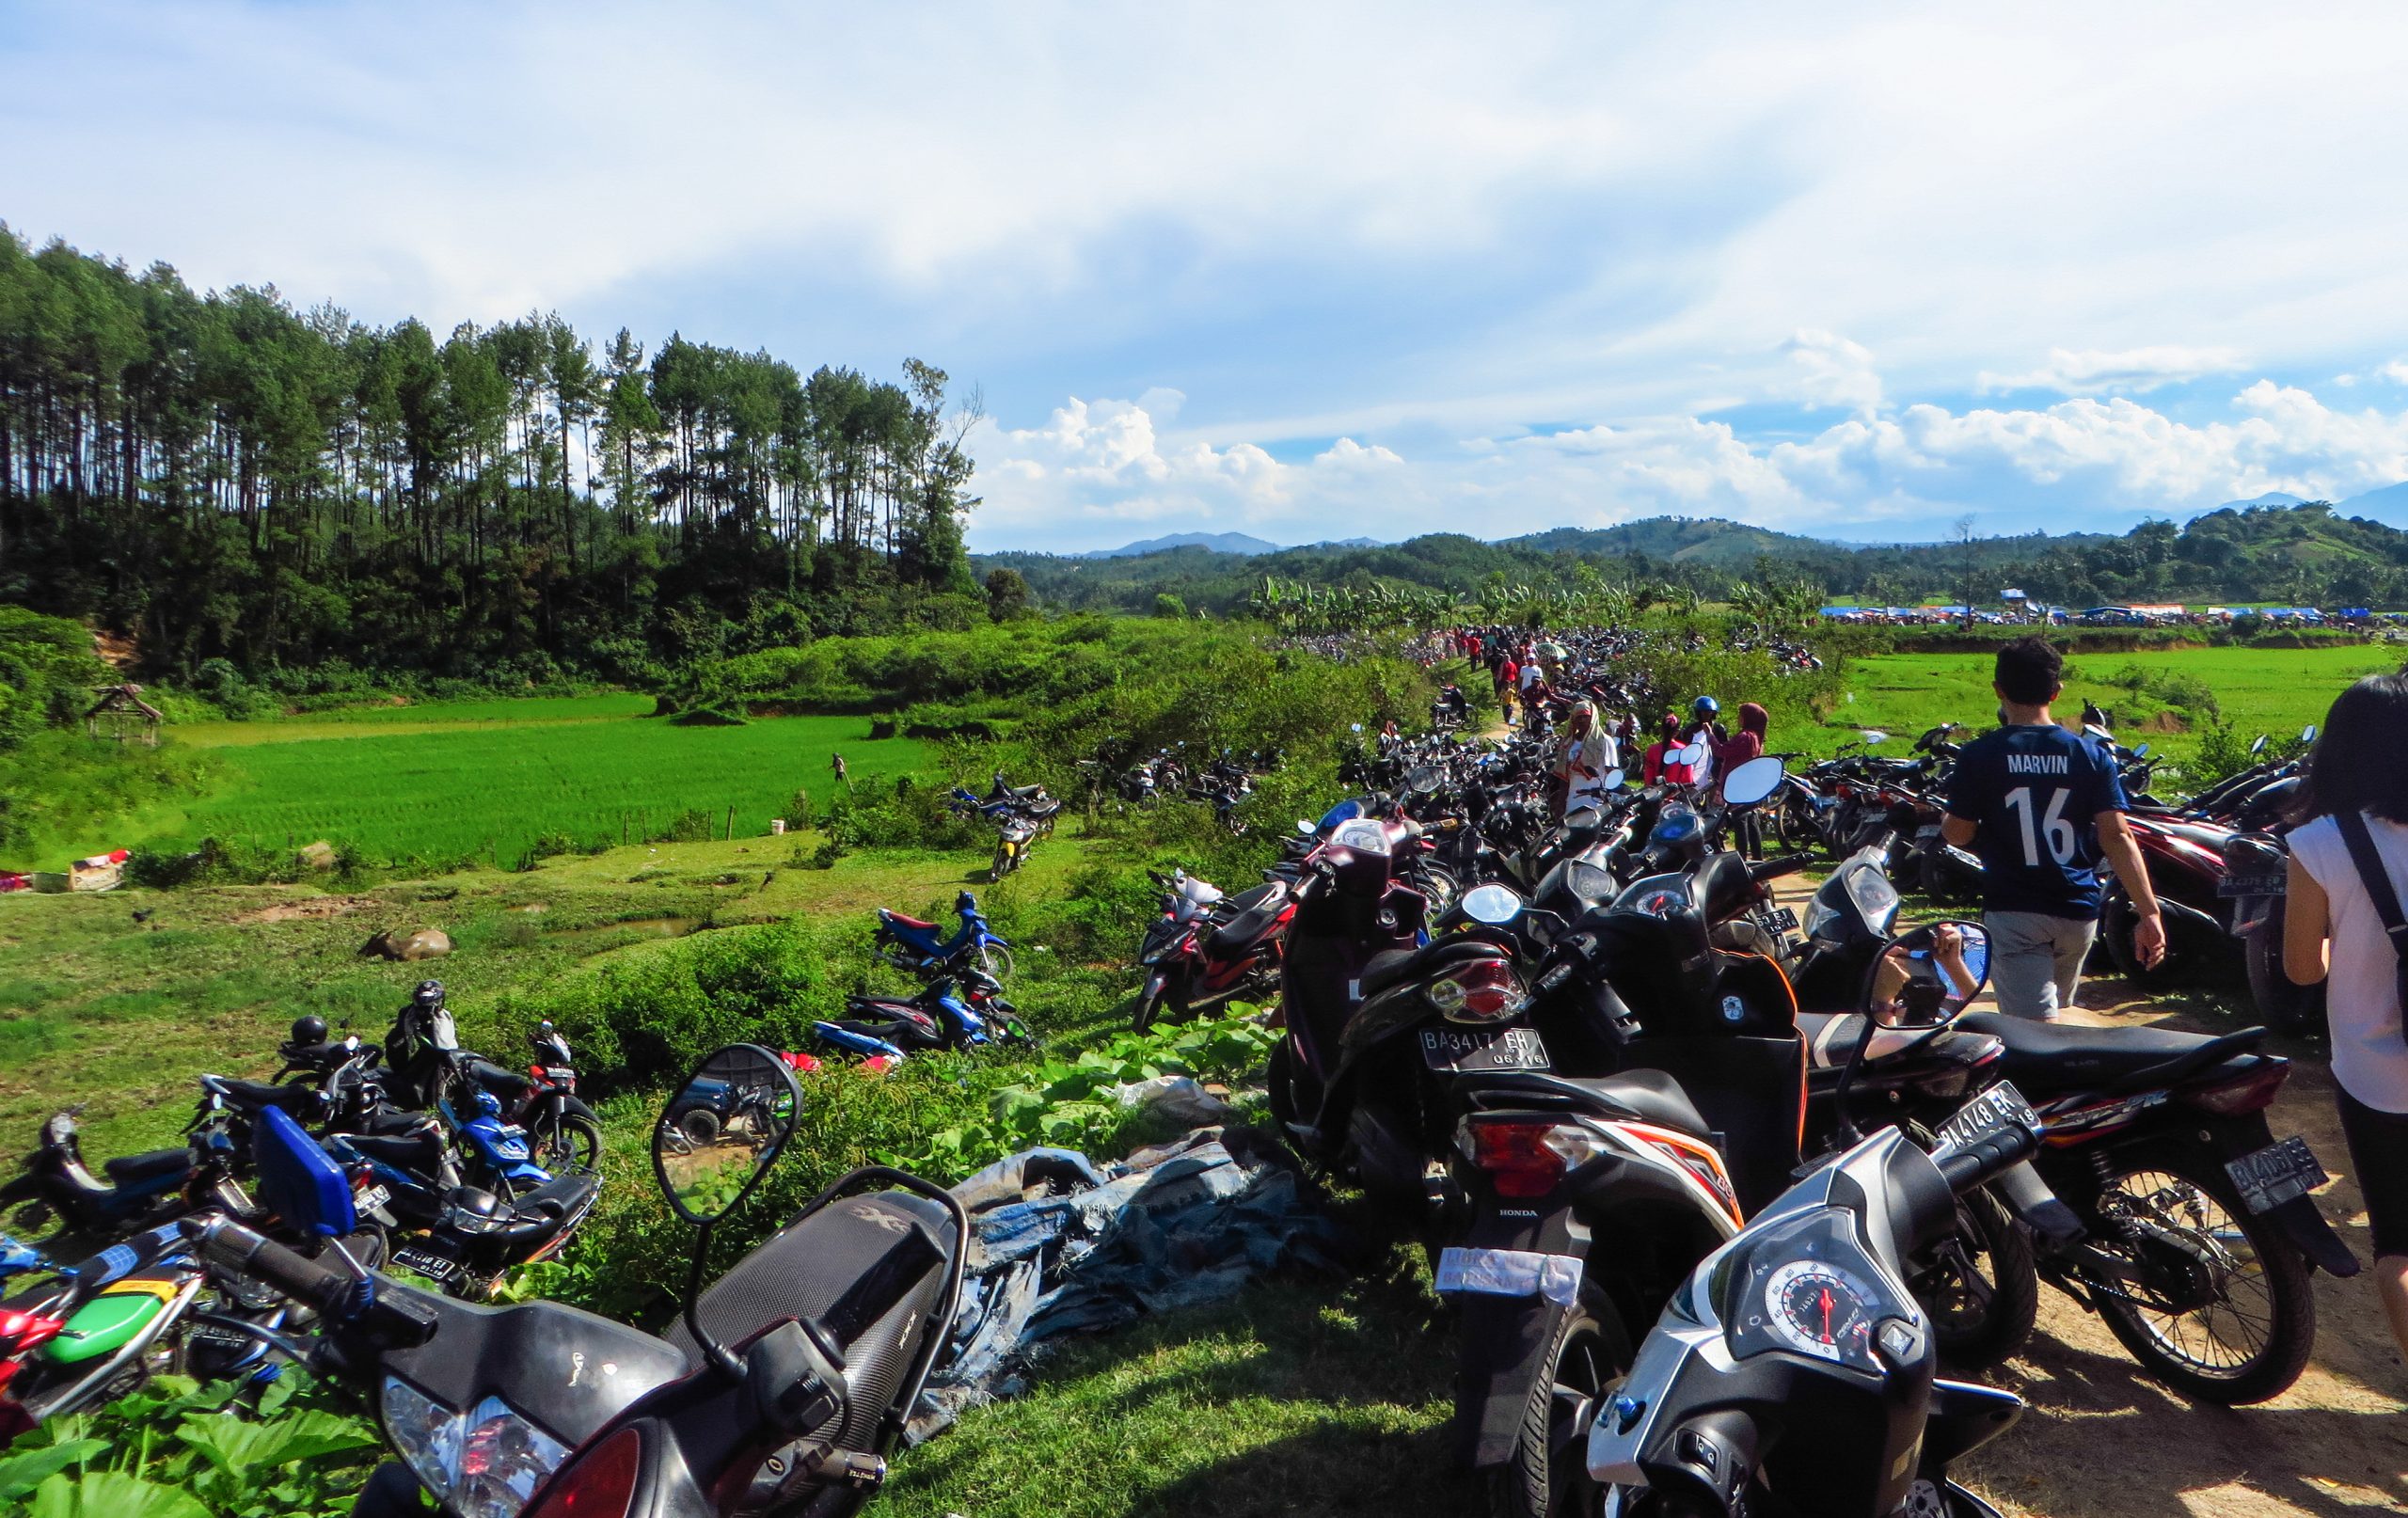 Swarm of motorcycles parked along the path to the Pacu Jawi festival